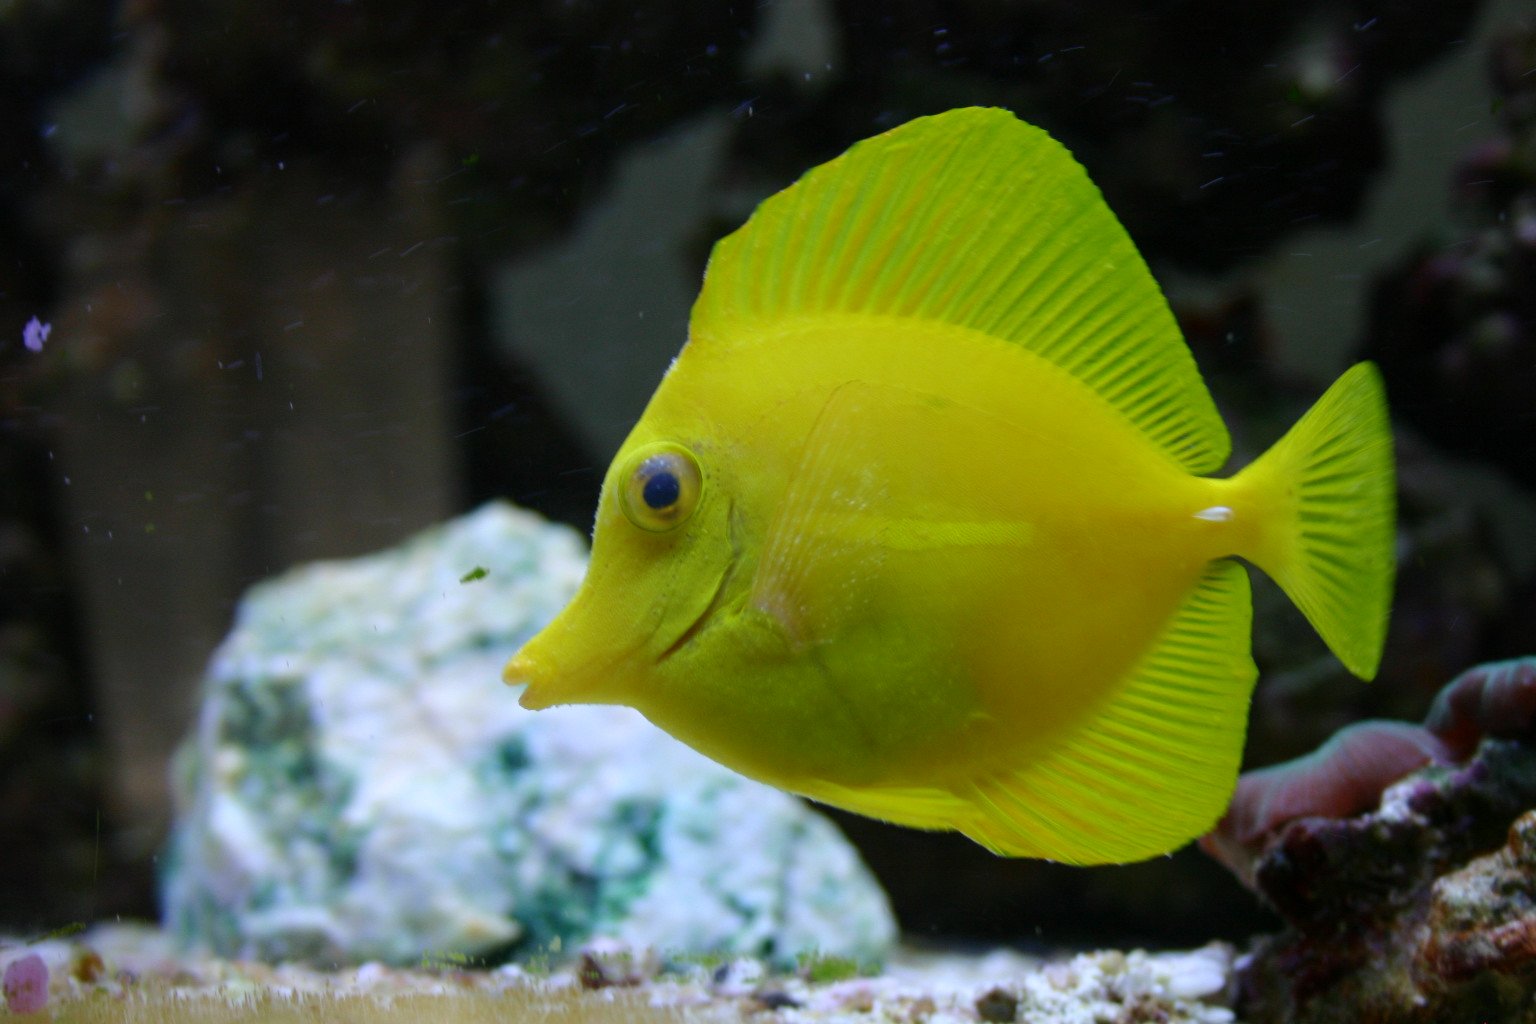 a close up view of a small yellow fish